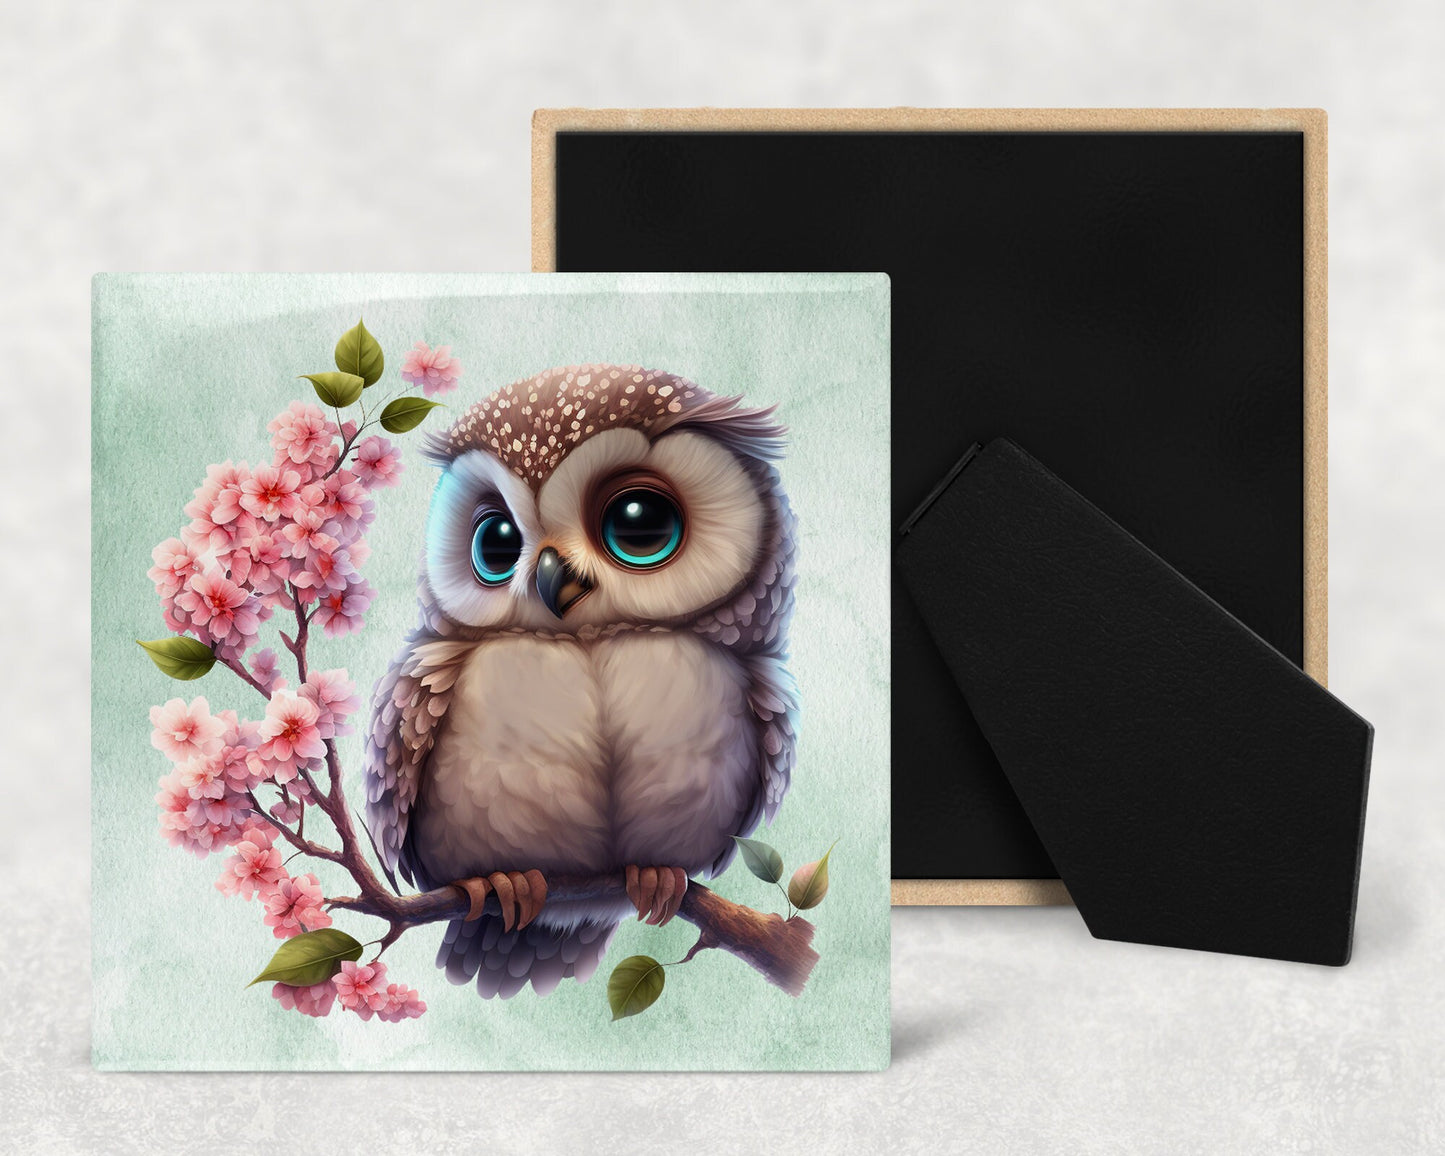 Cute Owl on Cherry Blossoms Decorative Ceramic Tile Set with Optional Easel Back - Available in 4 sizes - Set of 4